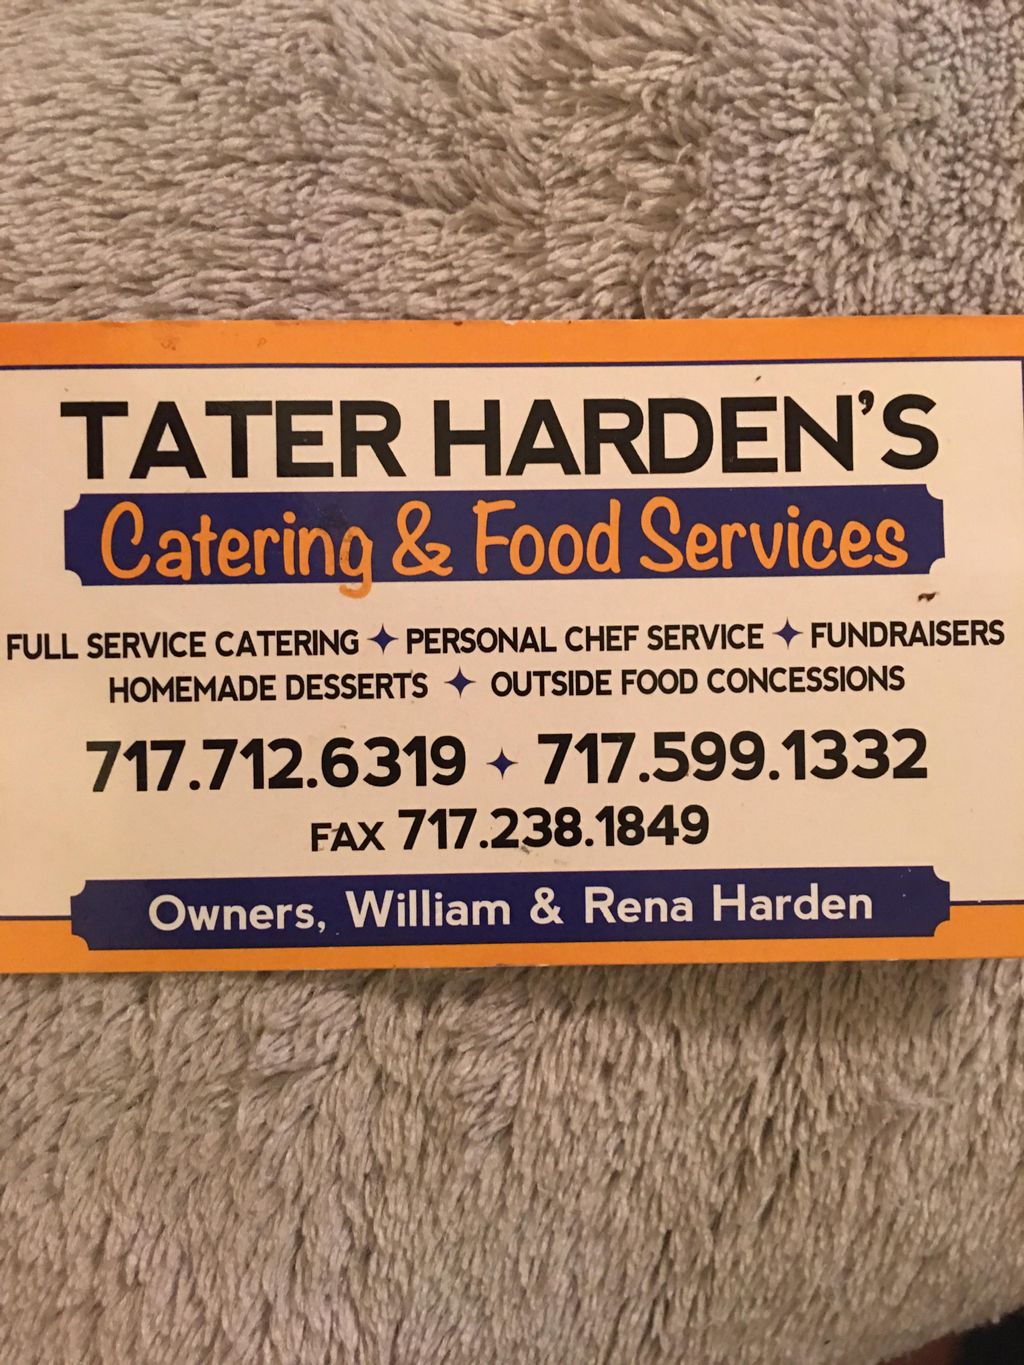 TATER HARDEN'S catering & food services